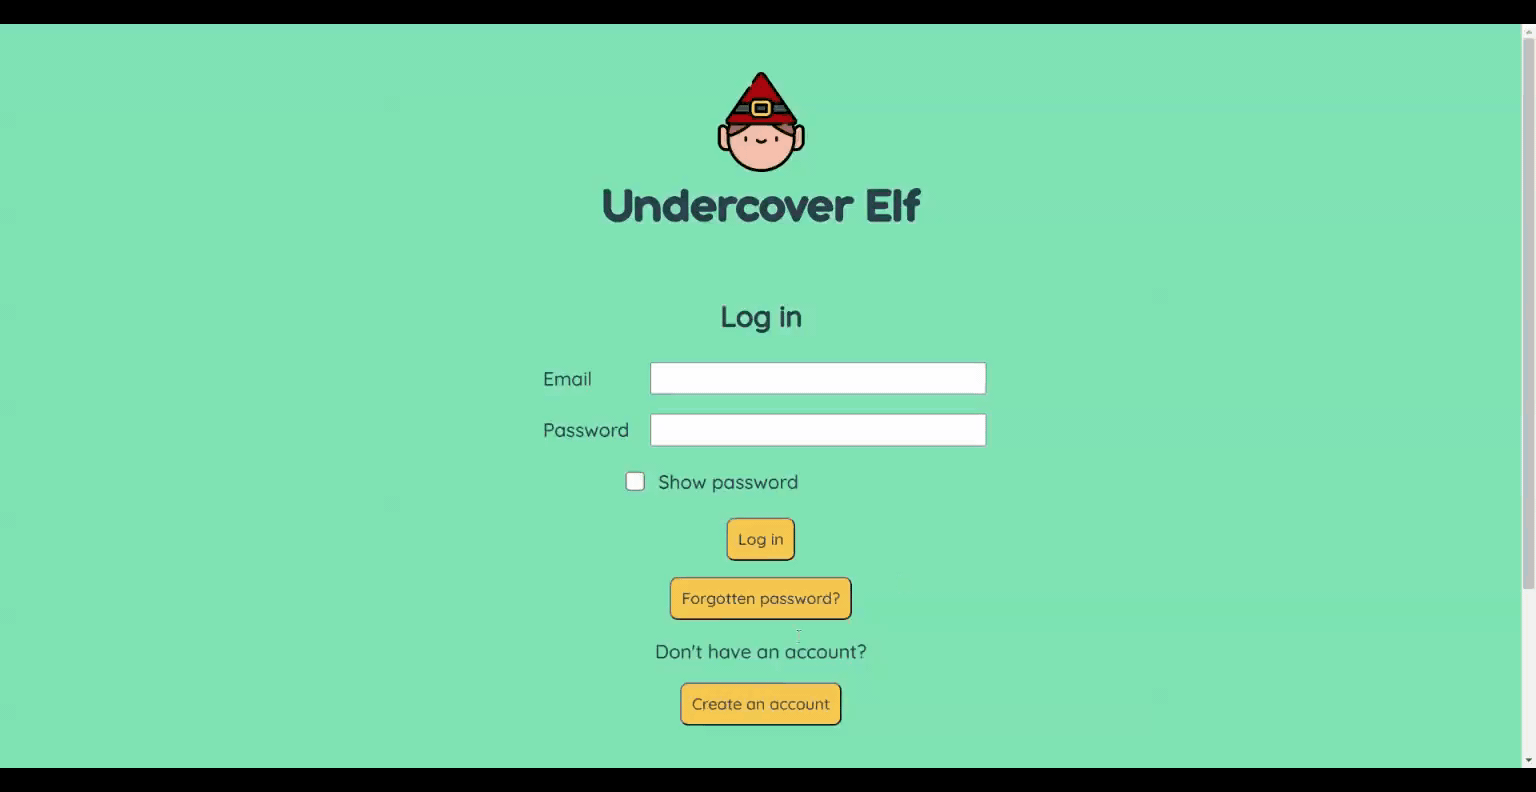 gif showing a demonstration of the Undercover Elf app